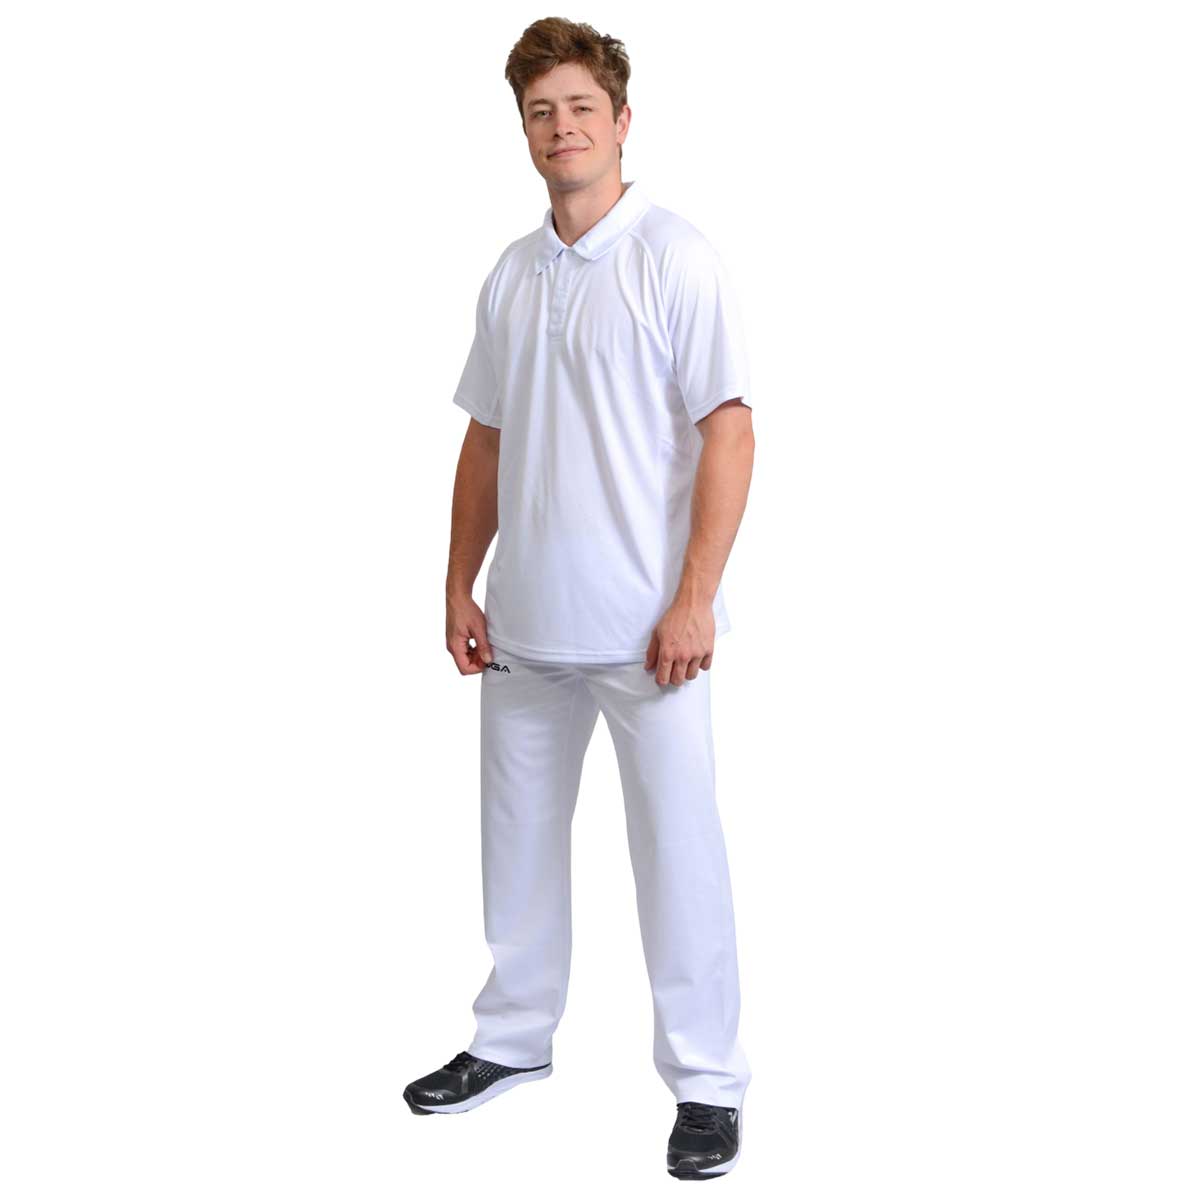 Cut and Sew Cricket Pants Manufacturers in Winnipeg